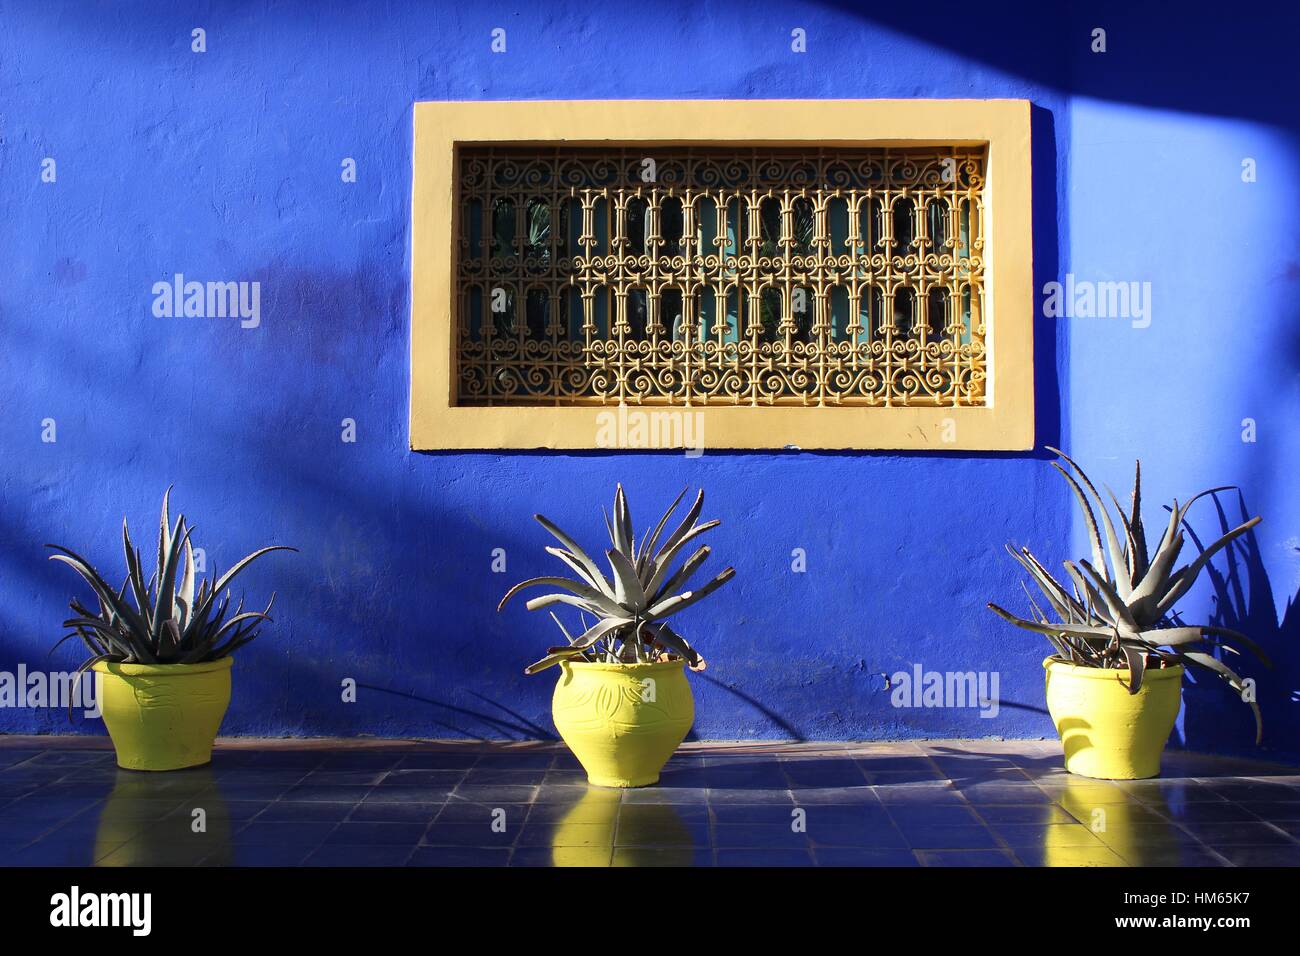 jardin majorelle, in the old town of Marrakech. Blue and dazzling with cacti and various plants. Morocco, North Africa, Arabic garden. Stock Photo